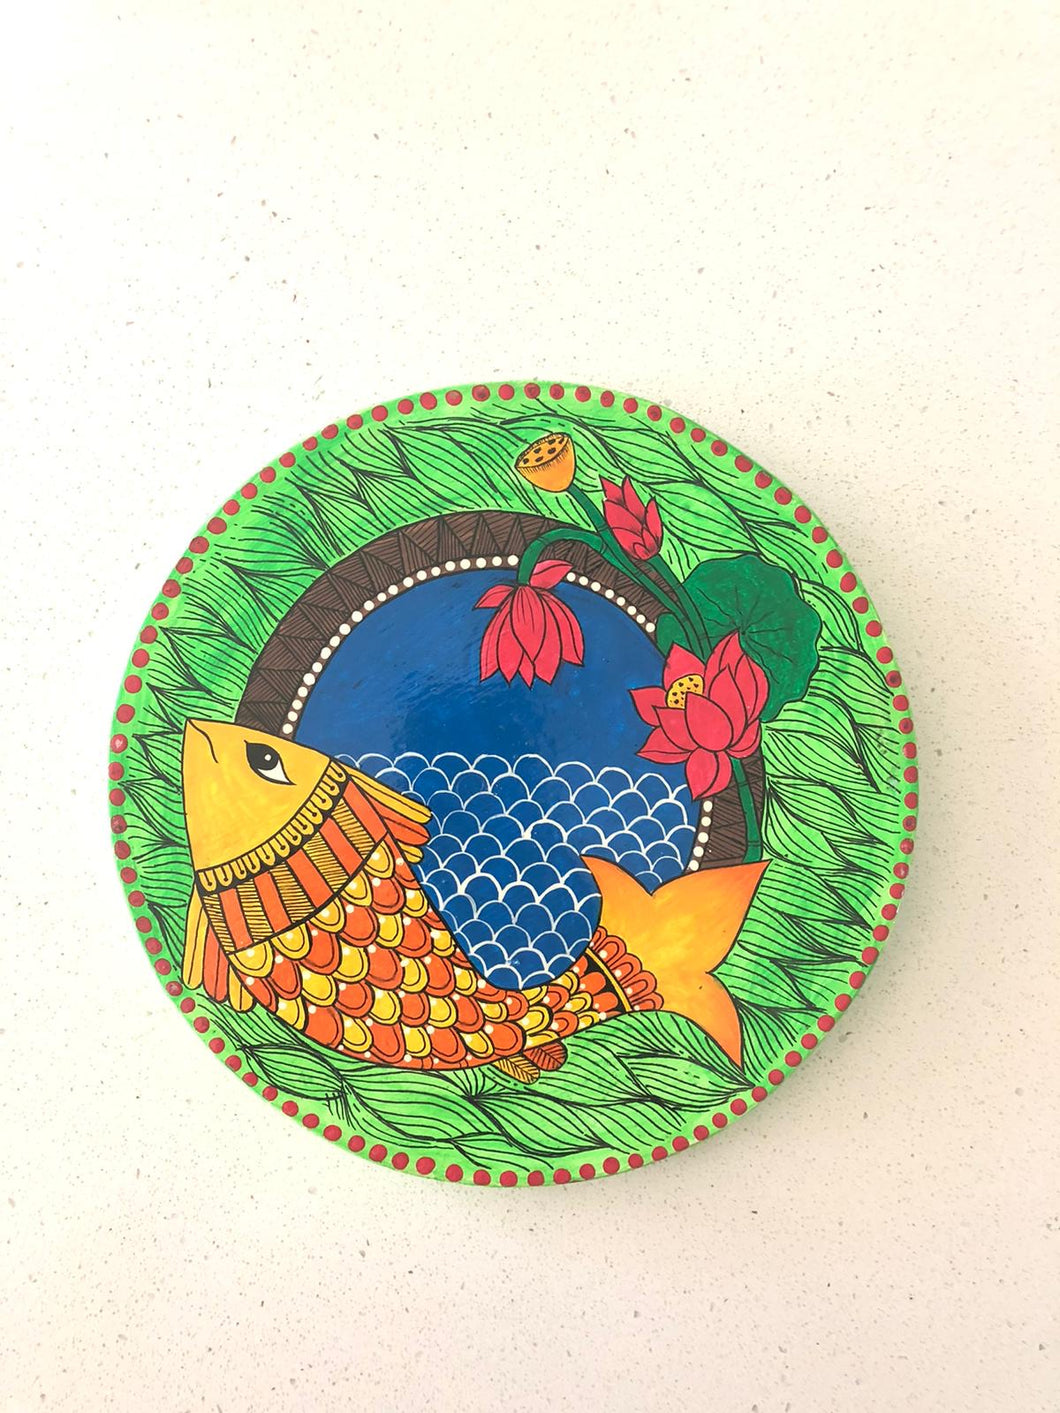 Handcrafted Natural Solid Wood Wall Hanging Plate for home decor, wedding gifts, housewarming gifts, general gift of Gold Fish in Madhubani